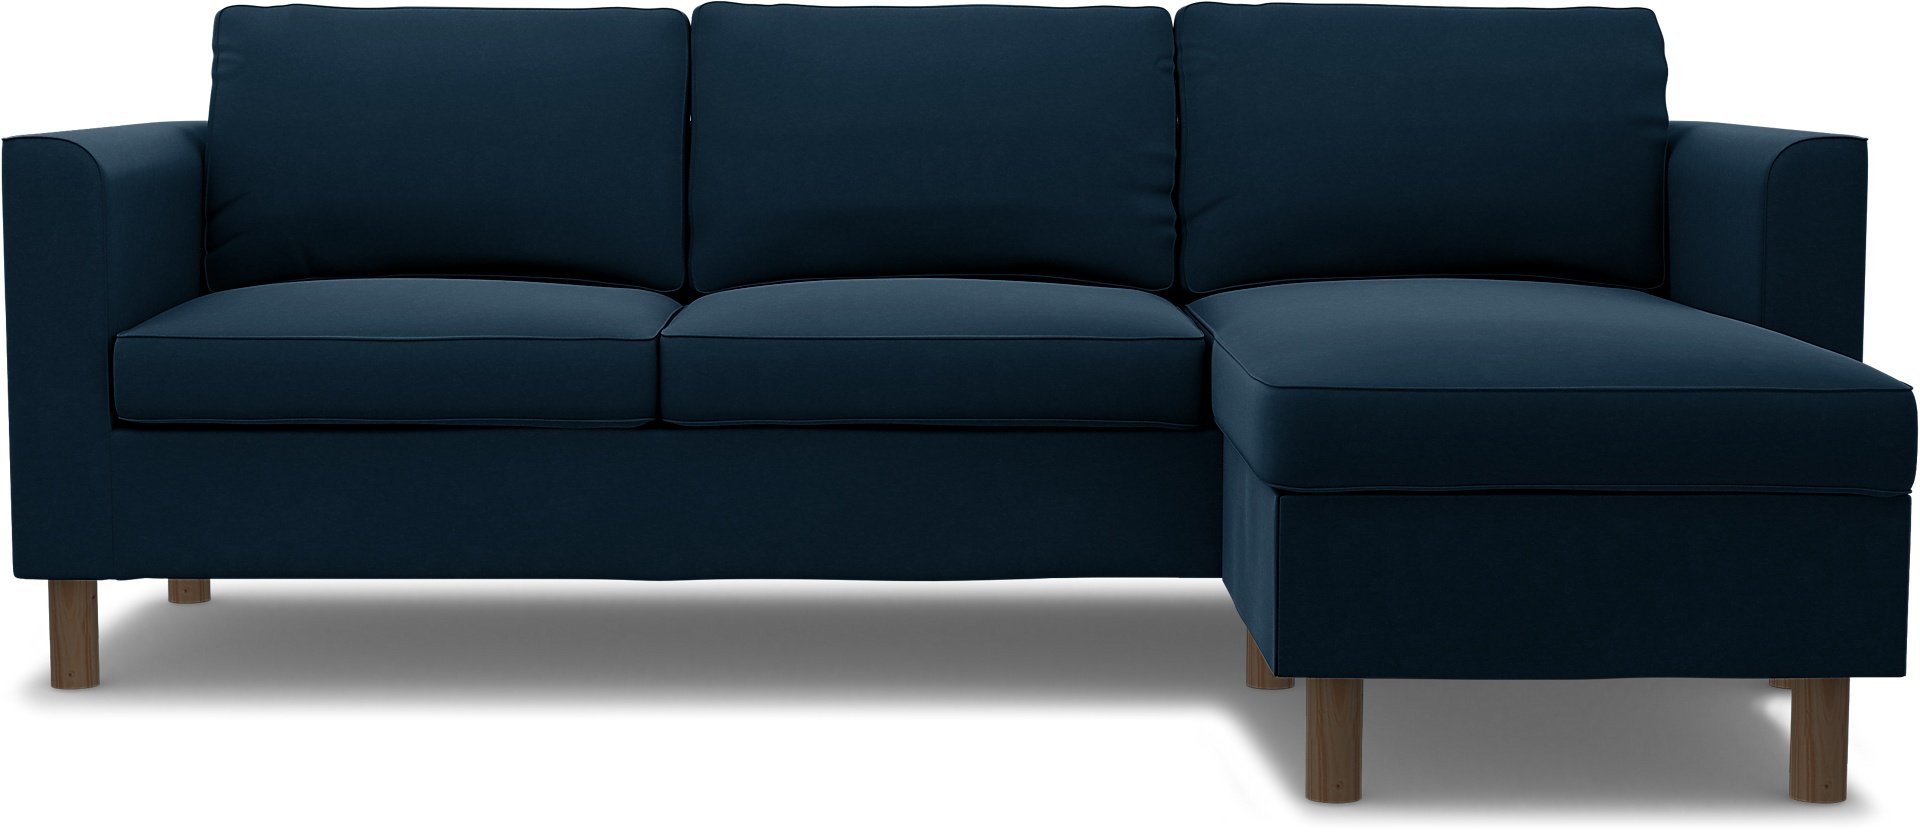 IKEA - Parup 3 Seater with chaise longue, Midnight, Velvet - Bemz